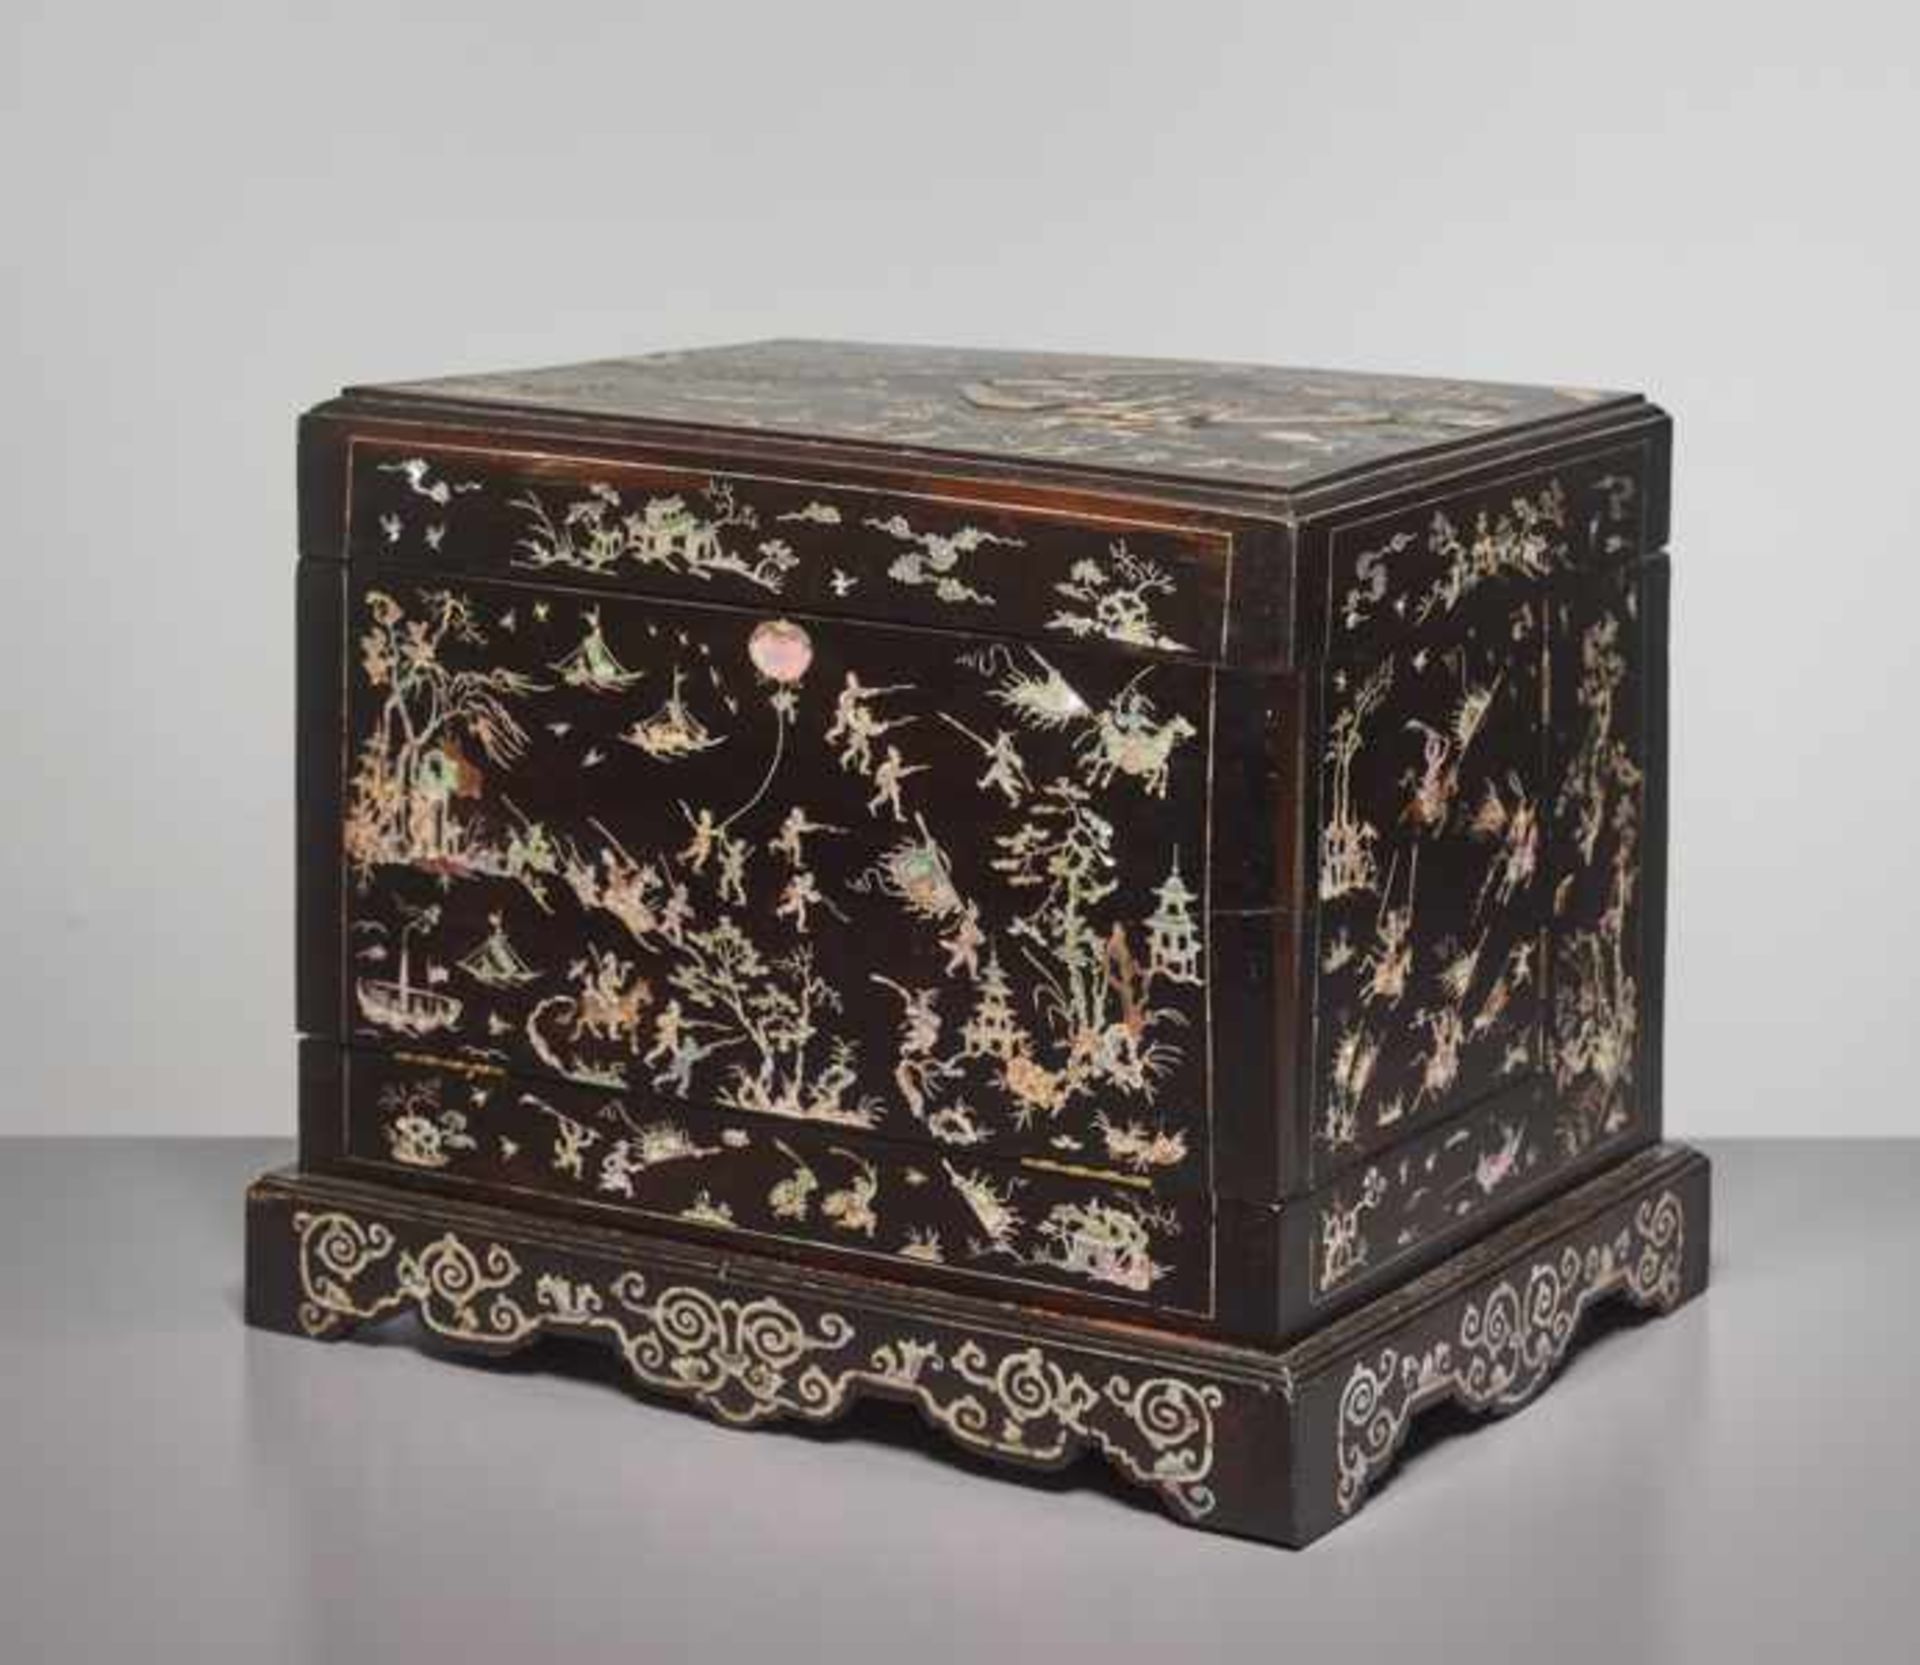 A YU MU ELMWOOD TABLE CABINET WITH MOTHER-OF-PEARL INLAYS, QING DYNASTY Ulmus parvifolia, also known